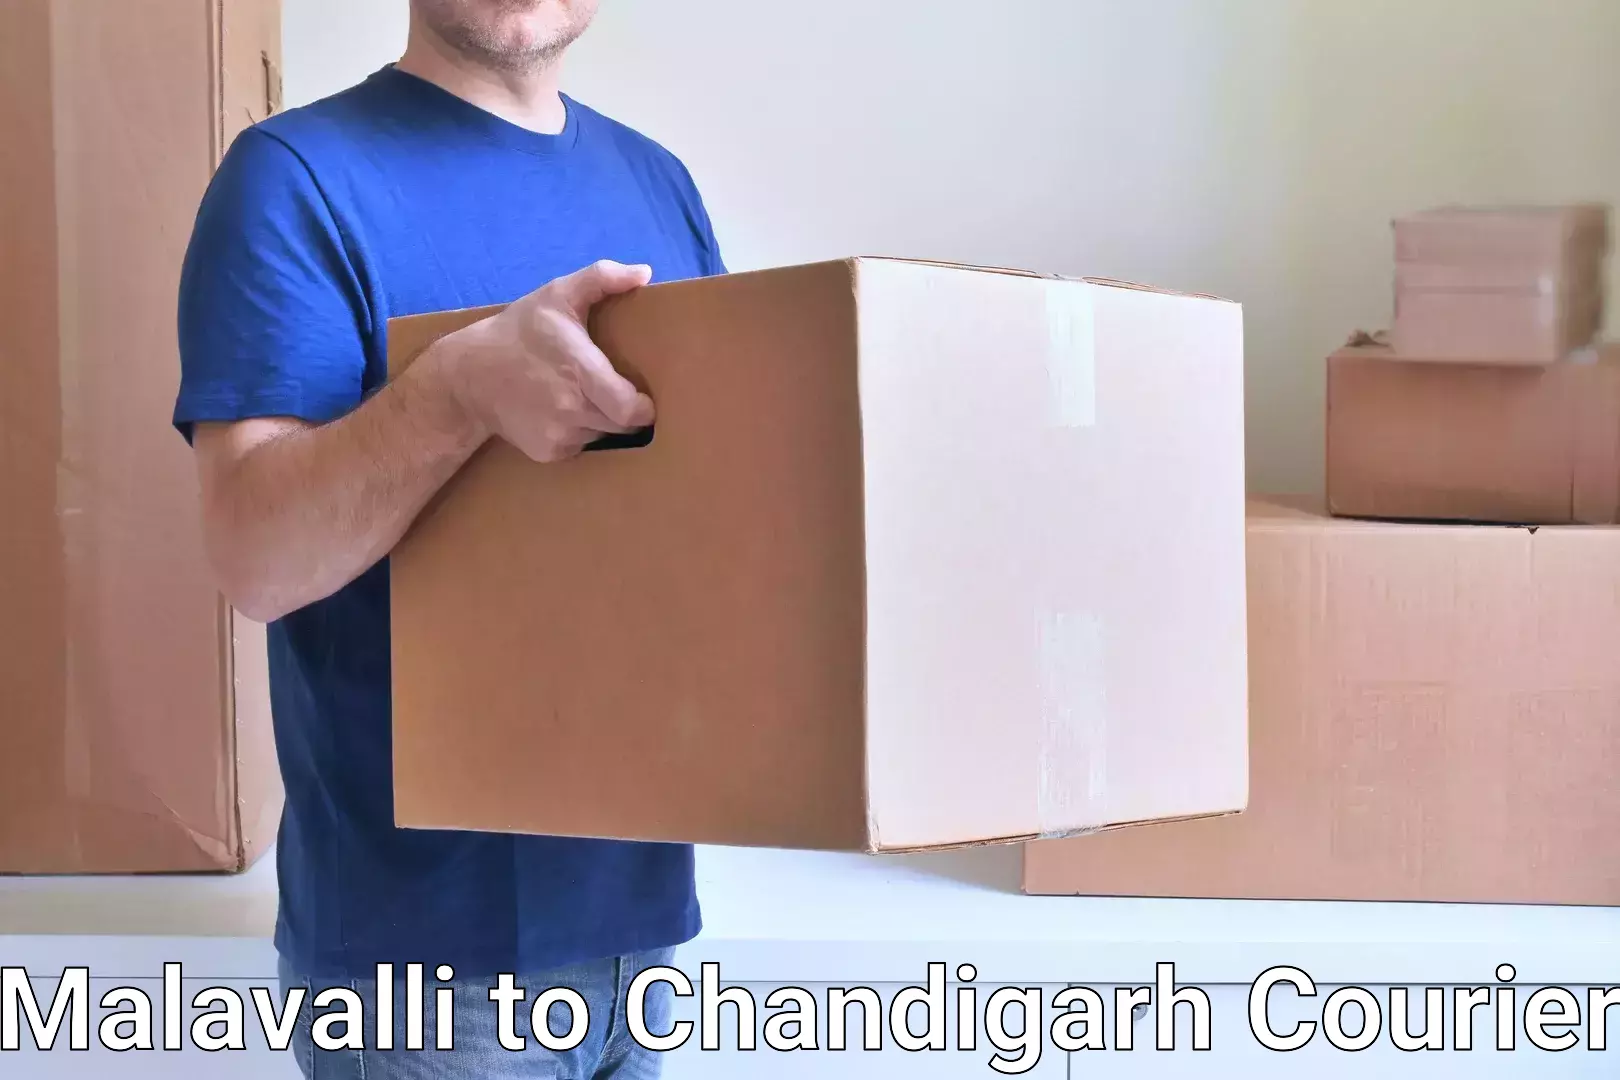 Package delivery network Malavalli to Chandigarh